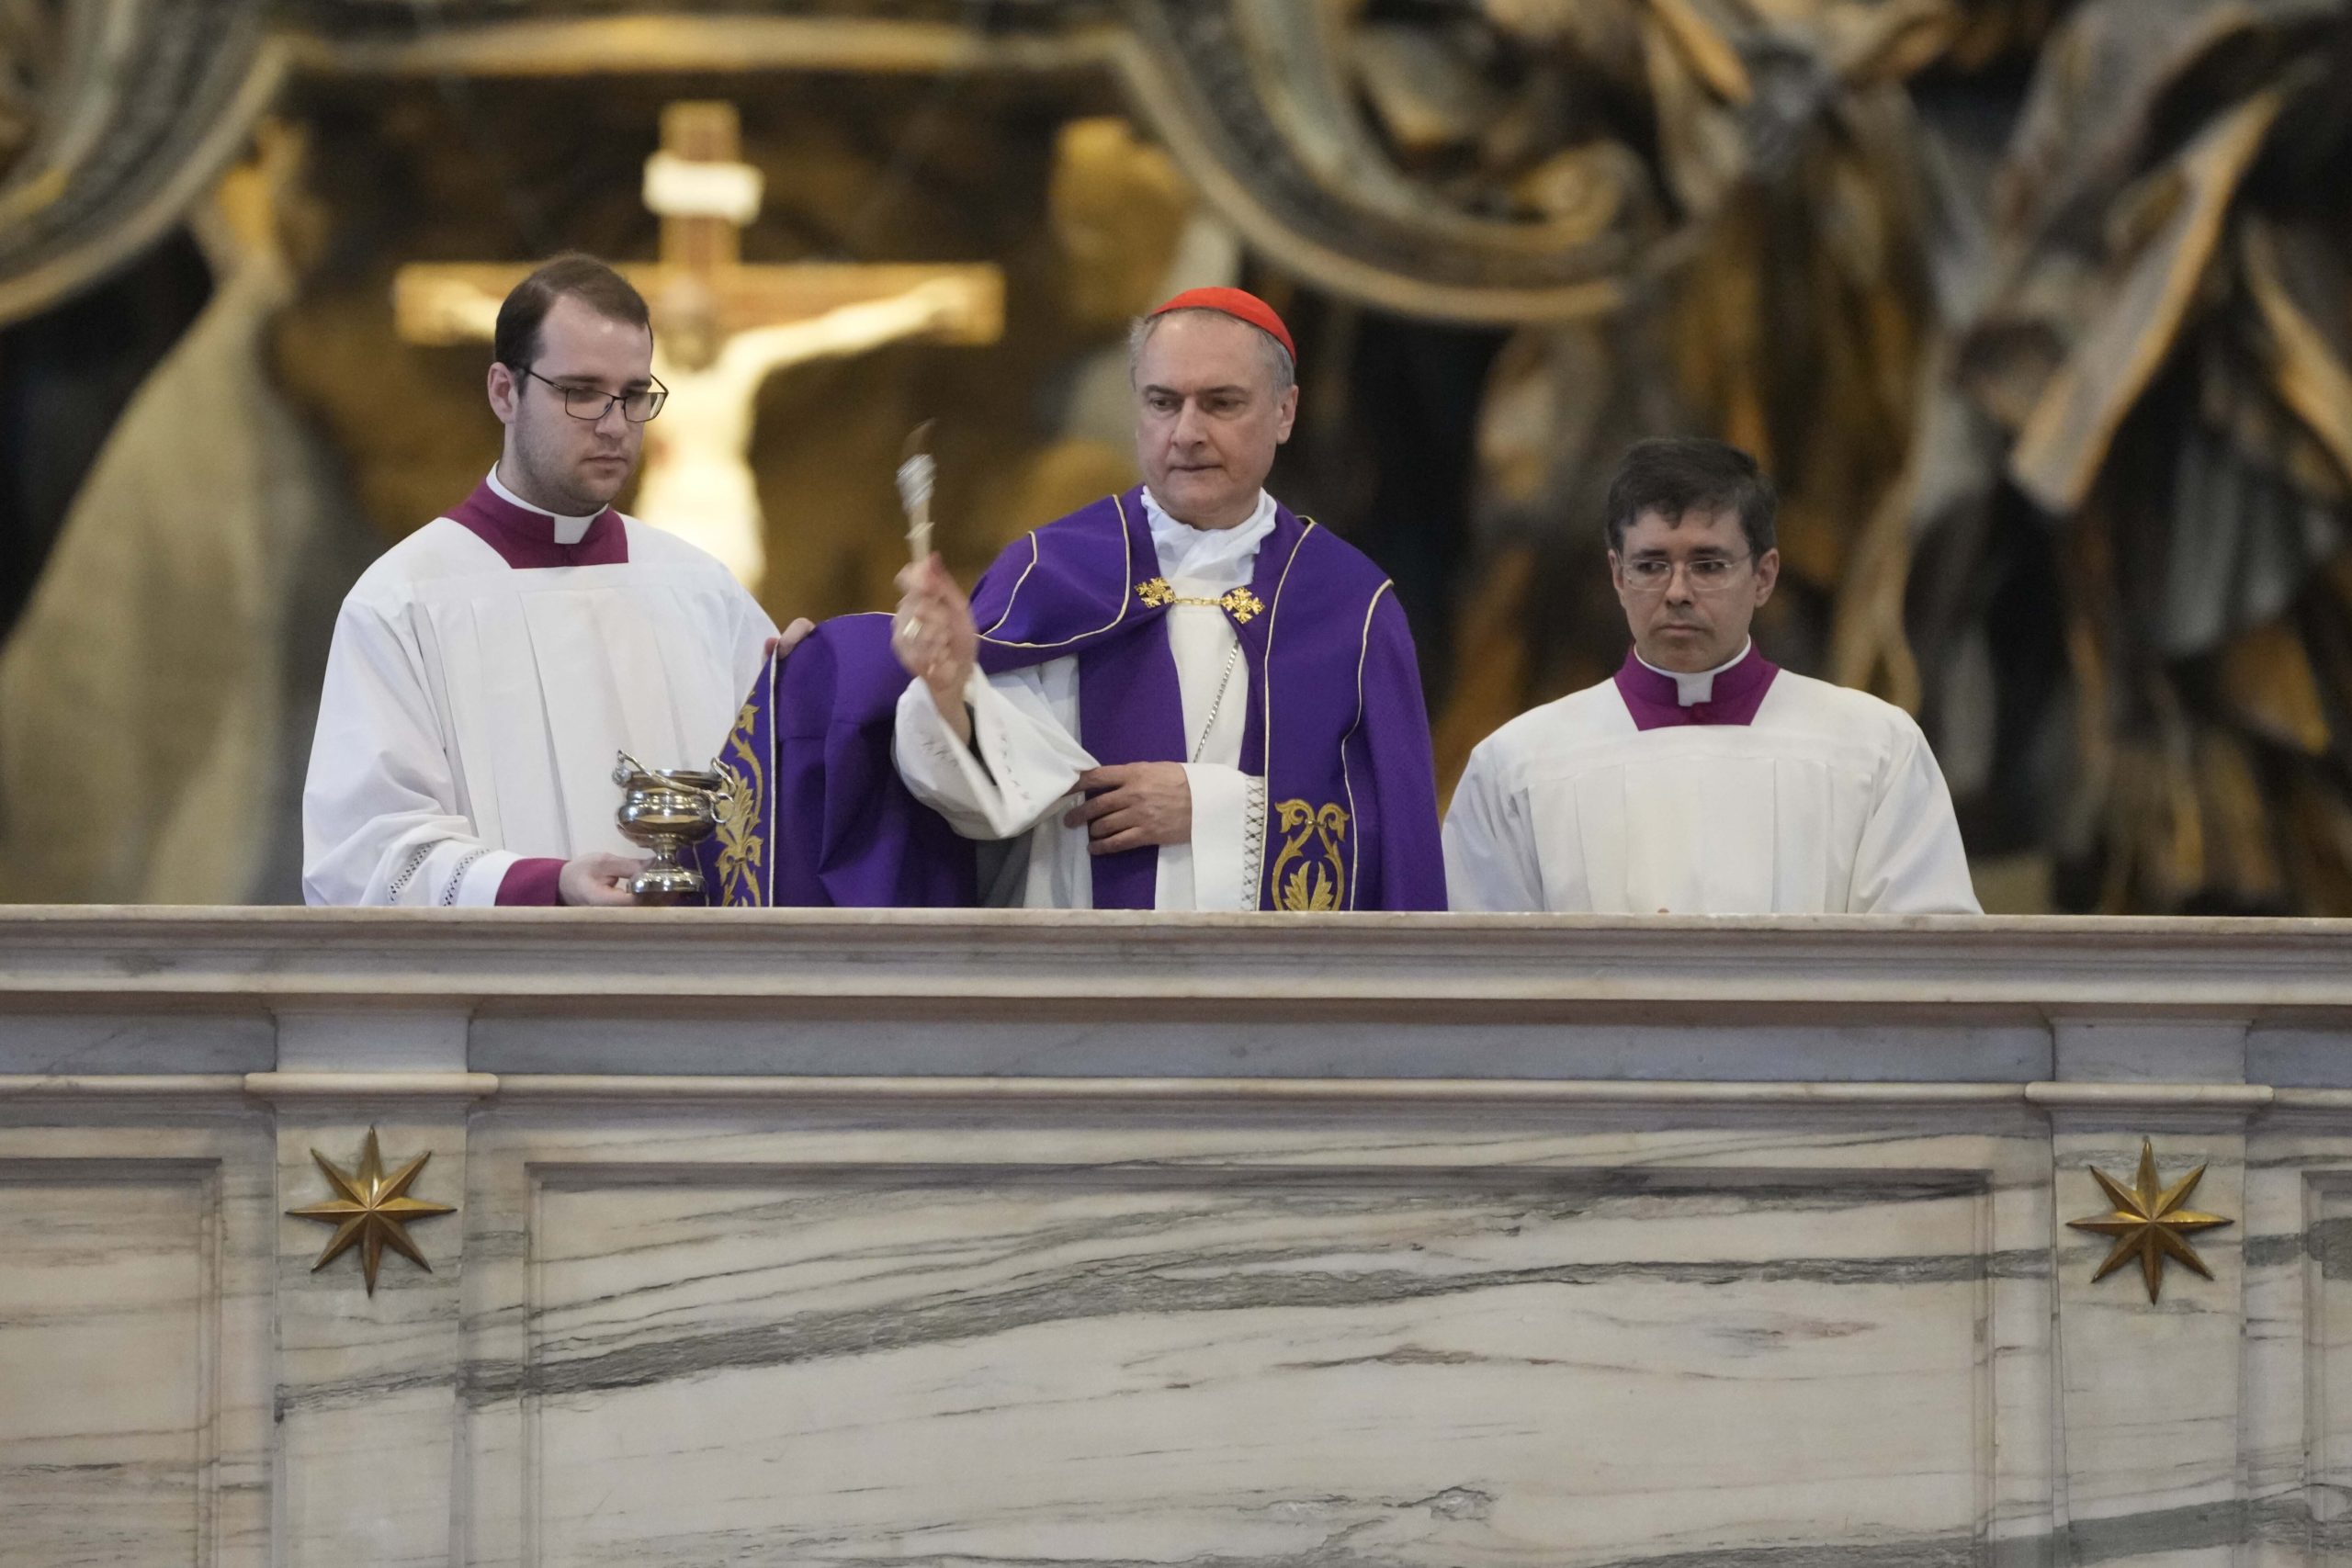 Cardinal performs rite at vandalized altar in St. Peter’s Basilica after nude protest.